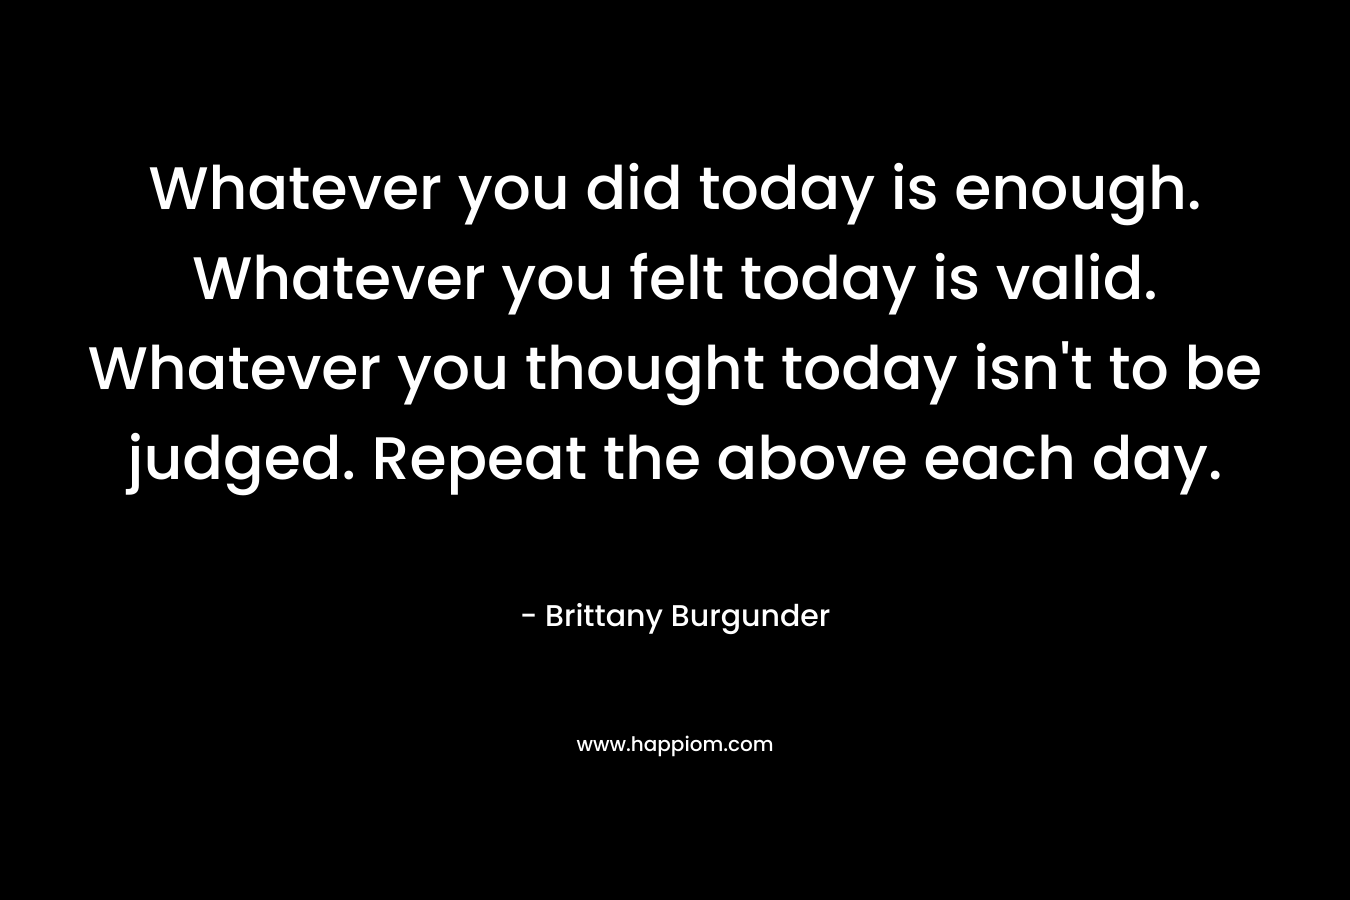 Whatever you did today is enough. Whatever you felt today is valid. Whatever you thought today isn't to be judged. Repeat the above each day.